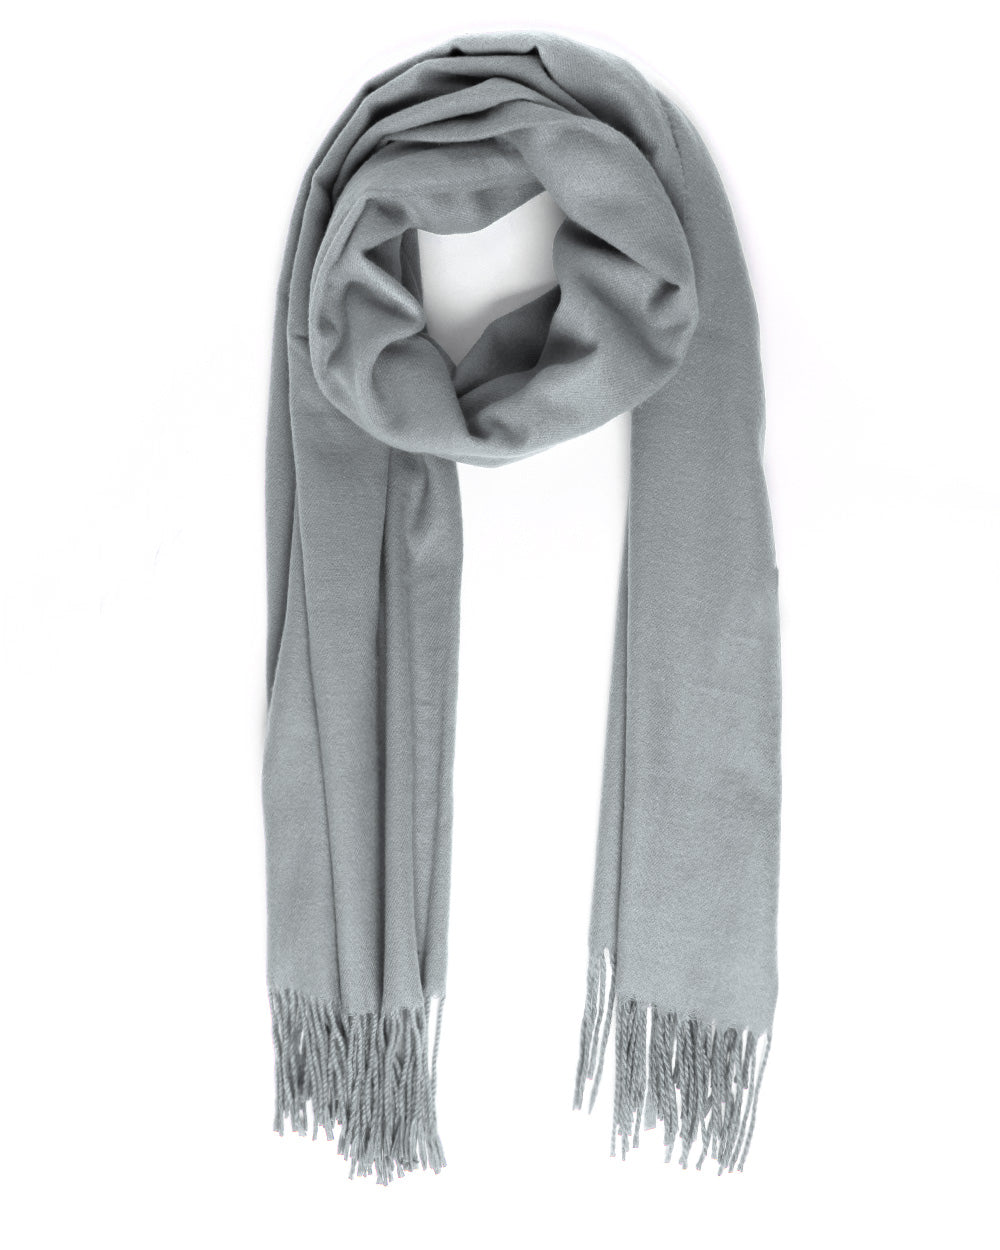 Unisex Scarf for Men and Women Solid Color Light Gray Casual Fringed Soft Basic GIOSAL-SH1001A